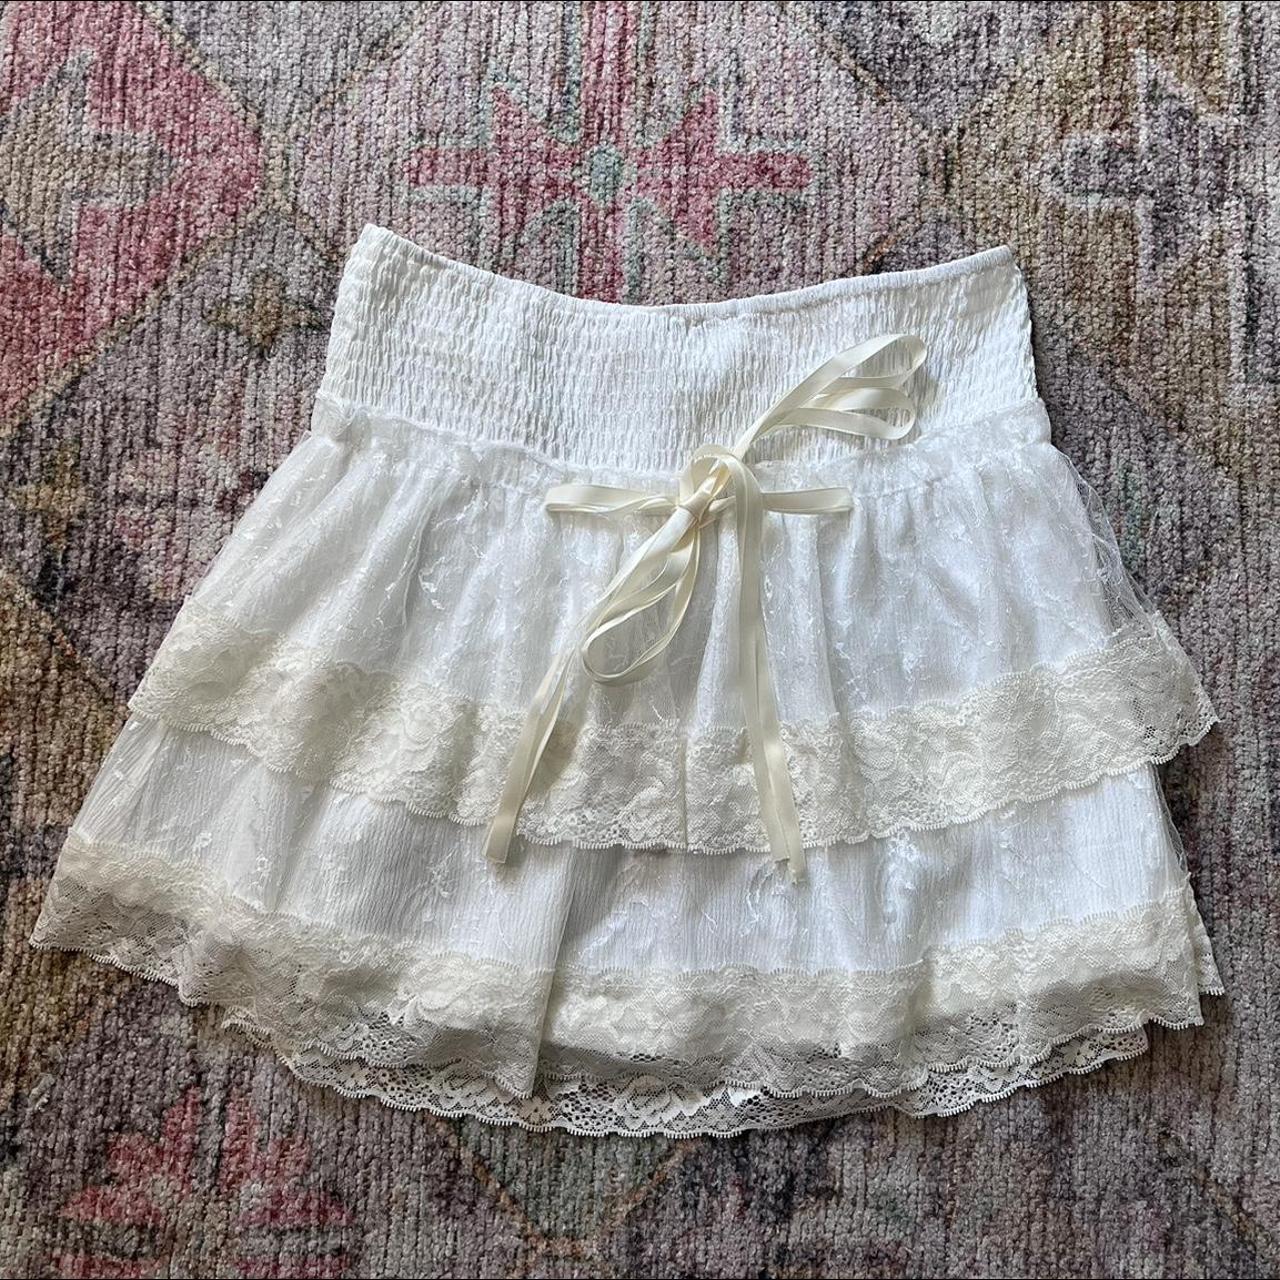 White lace mini skirt. Bow in front - Depop